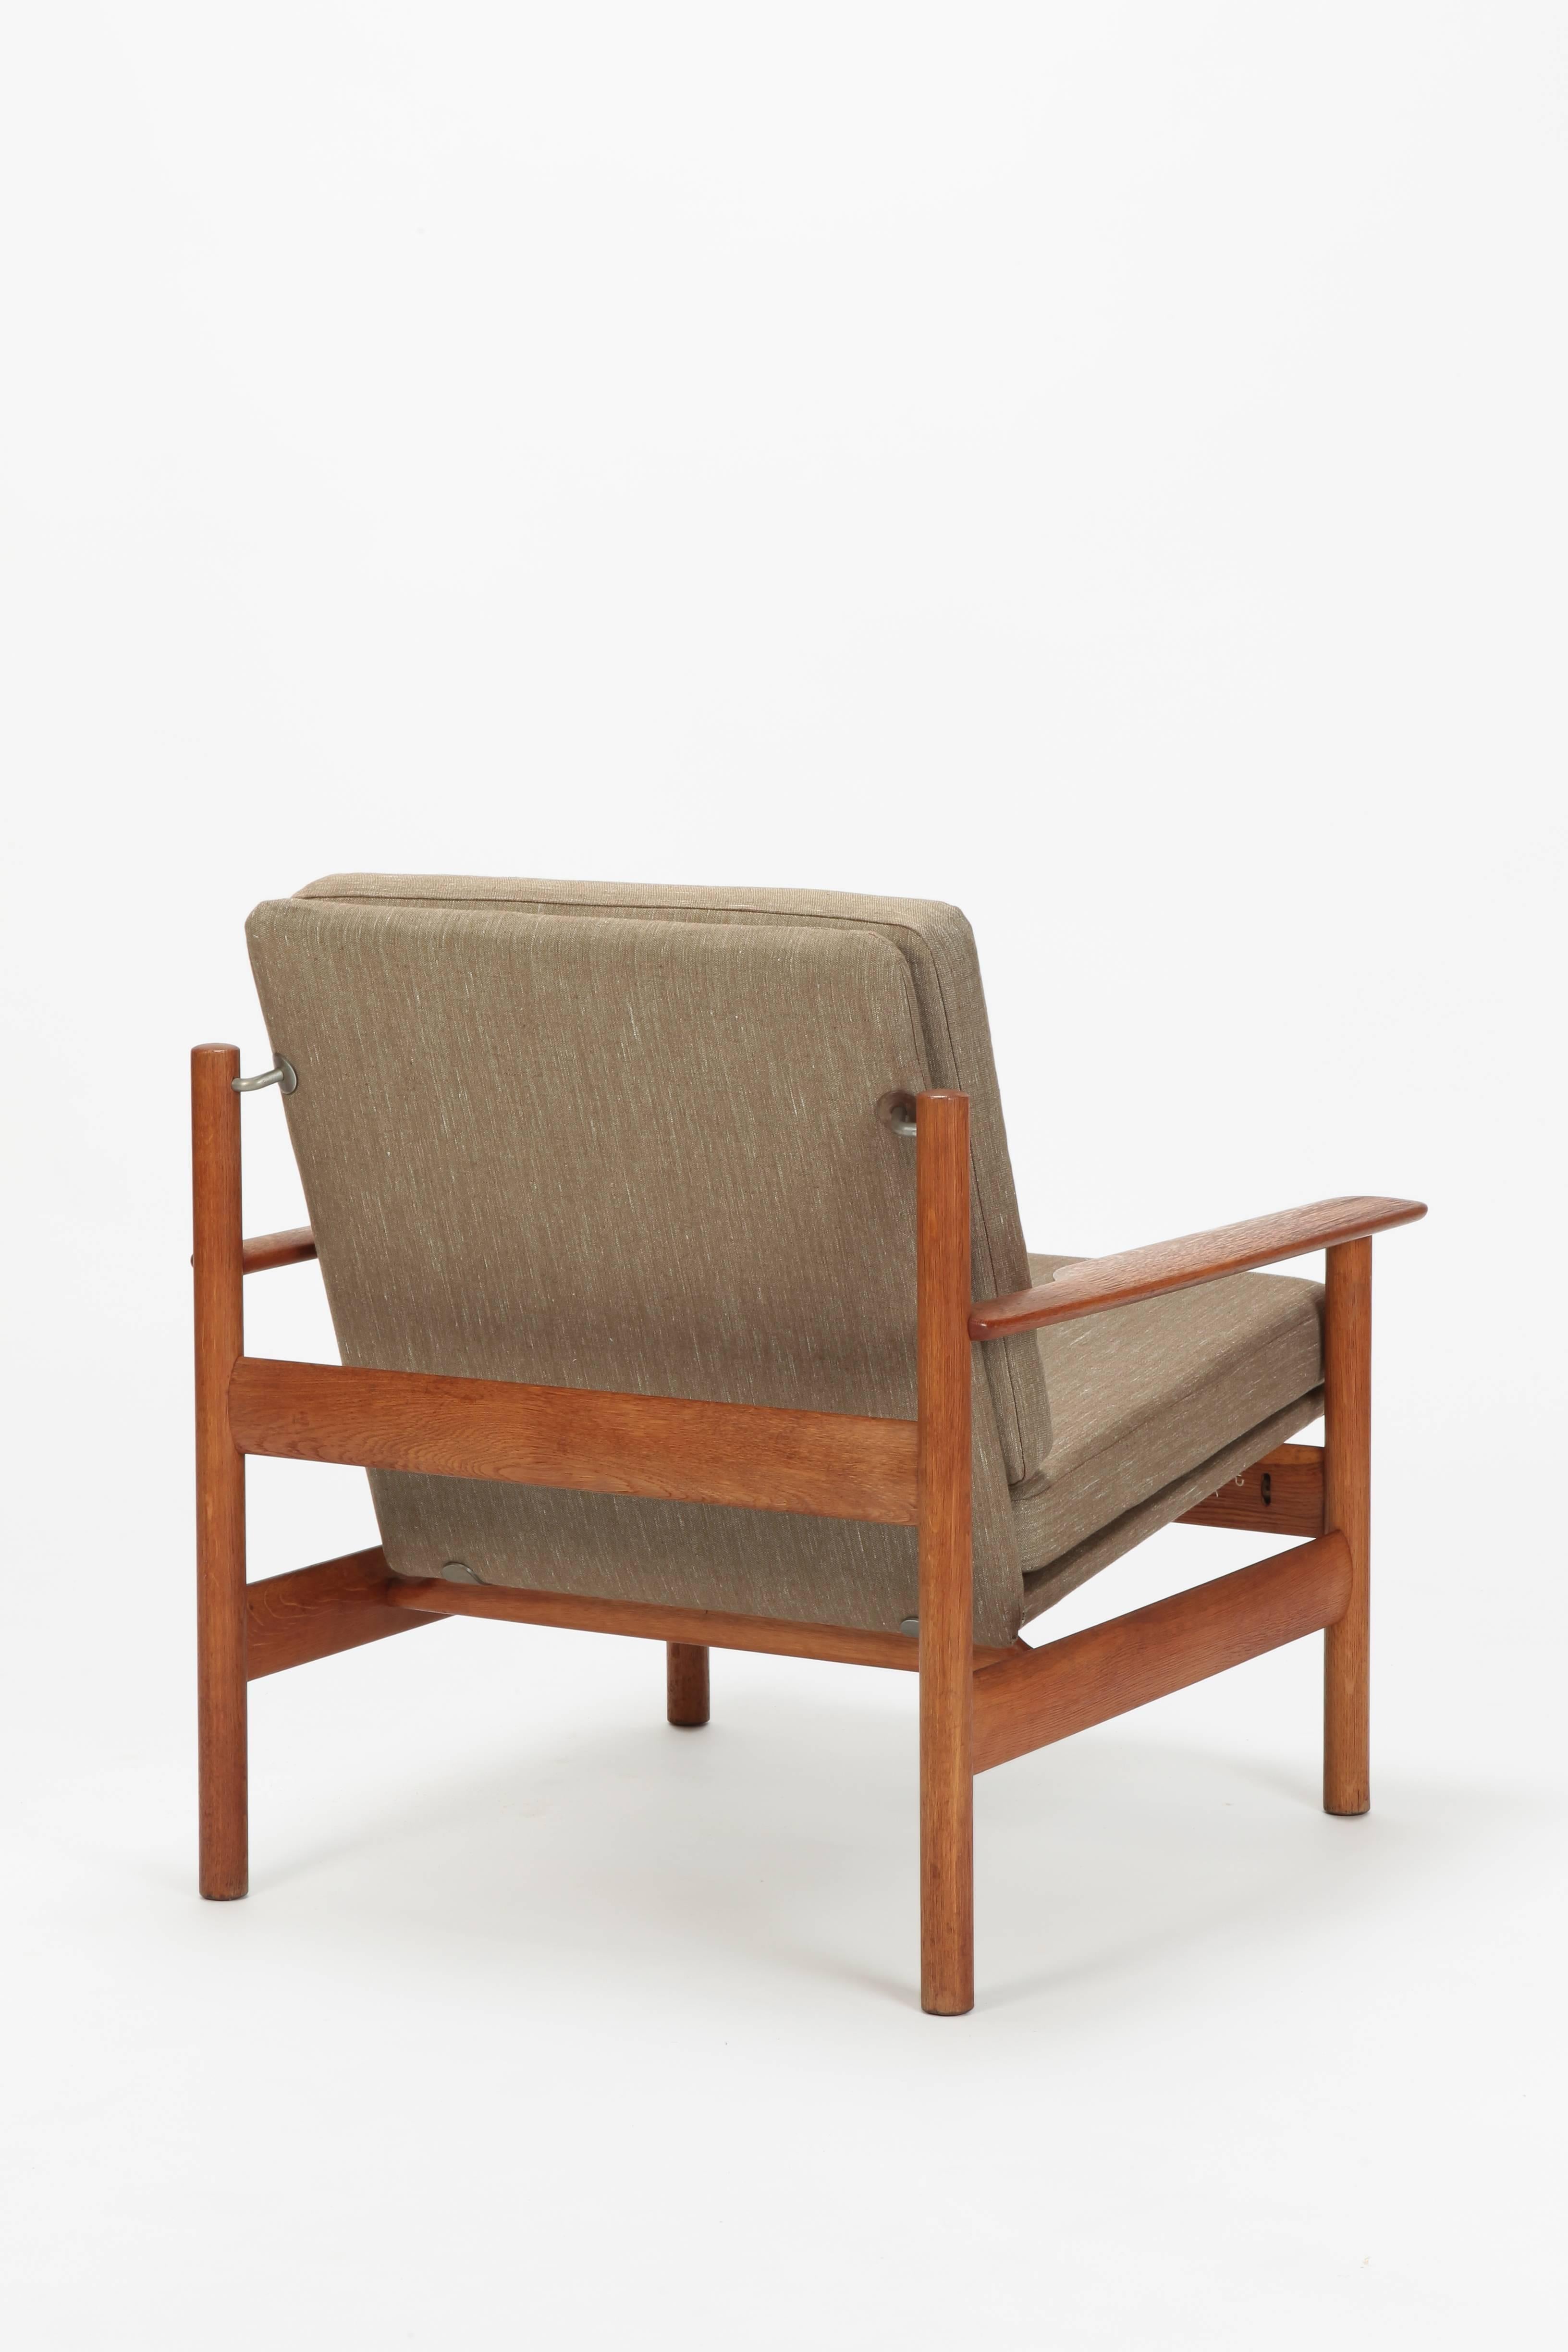 European Pair of Sven Ivar Dysthe Chairs by Dokka Mobler, 1950s